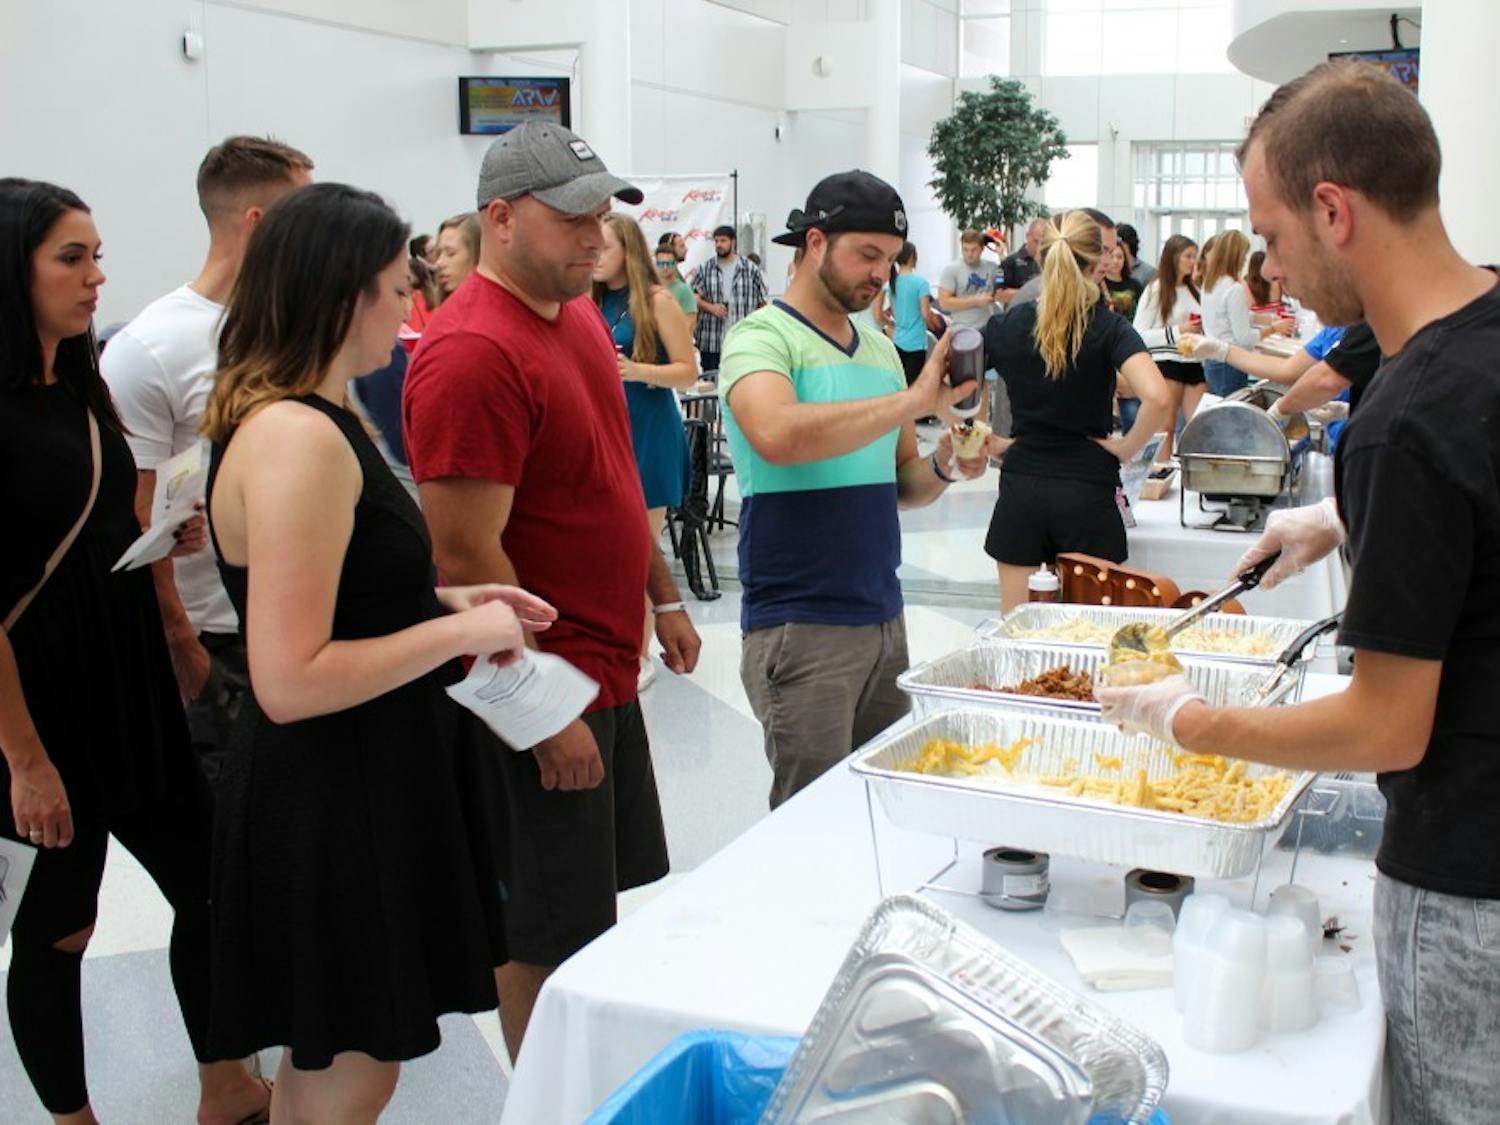 There were 11 competitors in the "Mac Attack" competition, including Mooney’s, The Press Box and Protocol Restaurant. The event was held in CFA seating area, with vendors lining the walls serving small cups of mac and cheese to attendees.